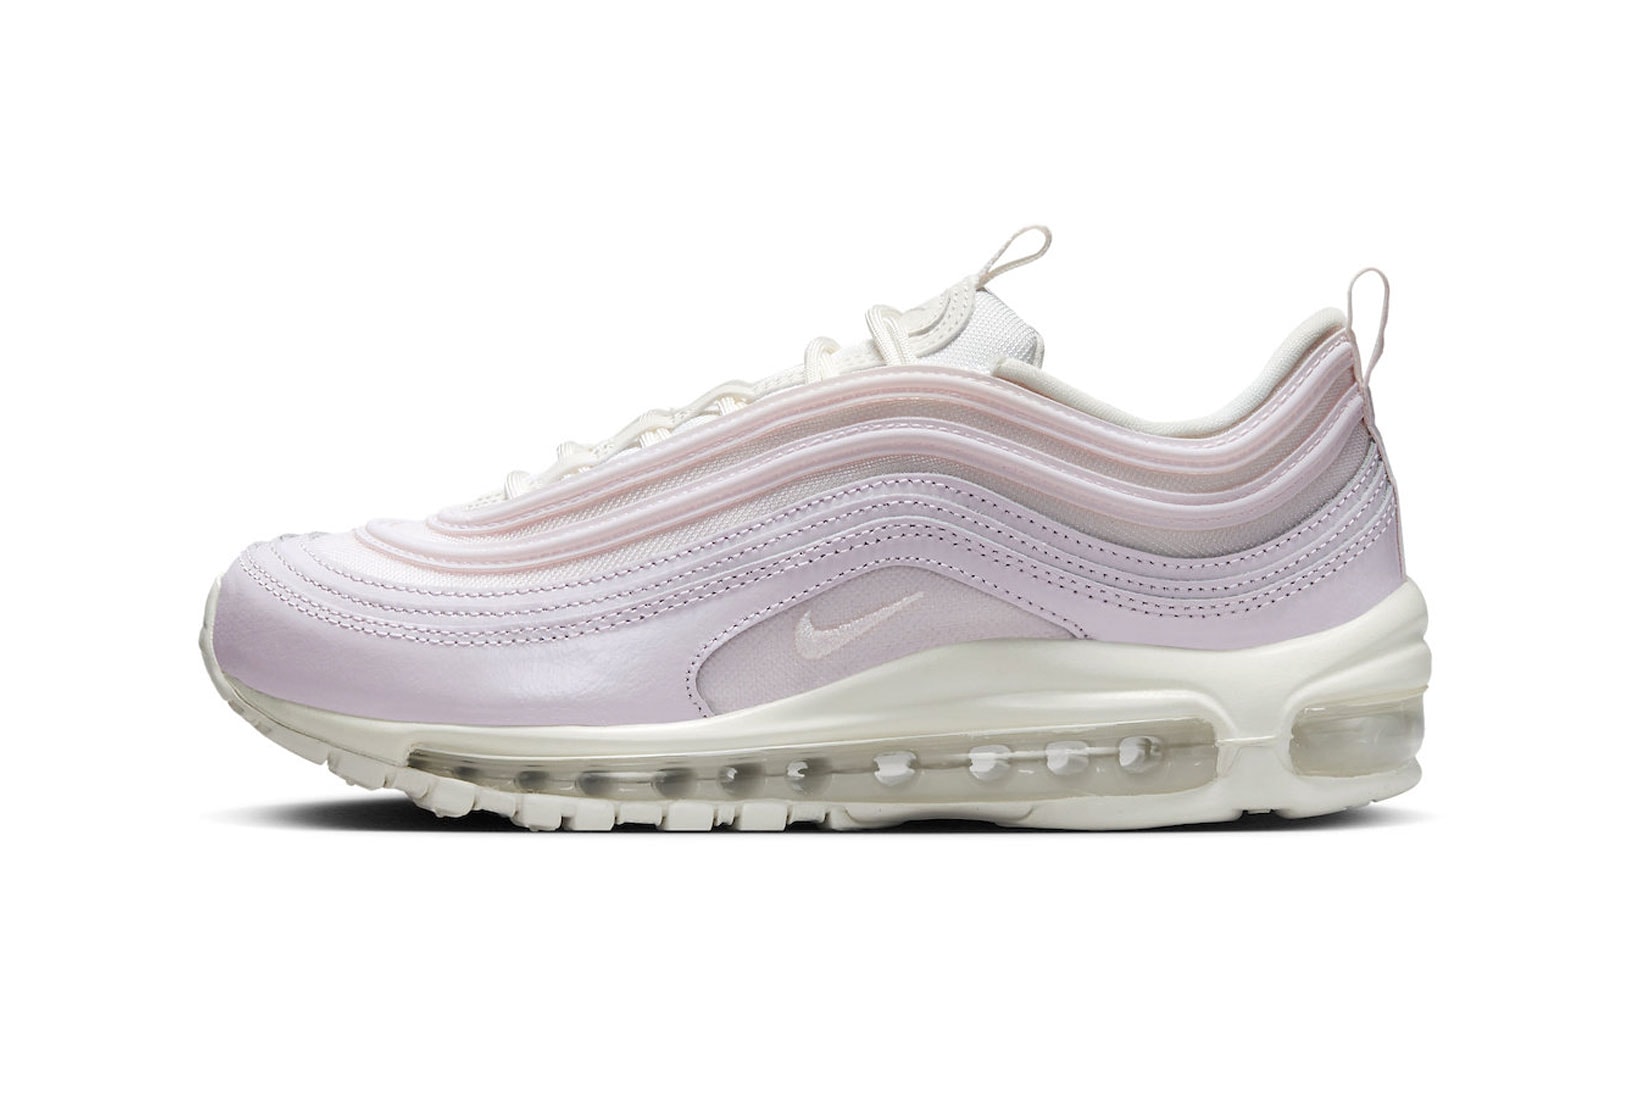 håndtering trussel Okklusion Nike Air Max 97 "Pink" Women's Exclusive Sneaker | Hypebae